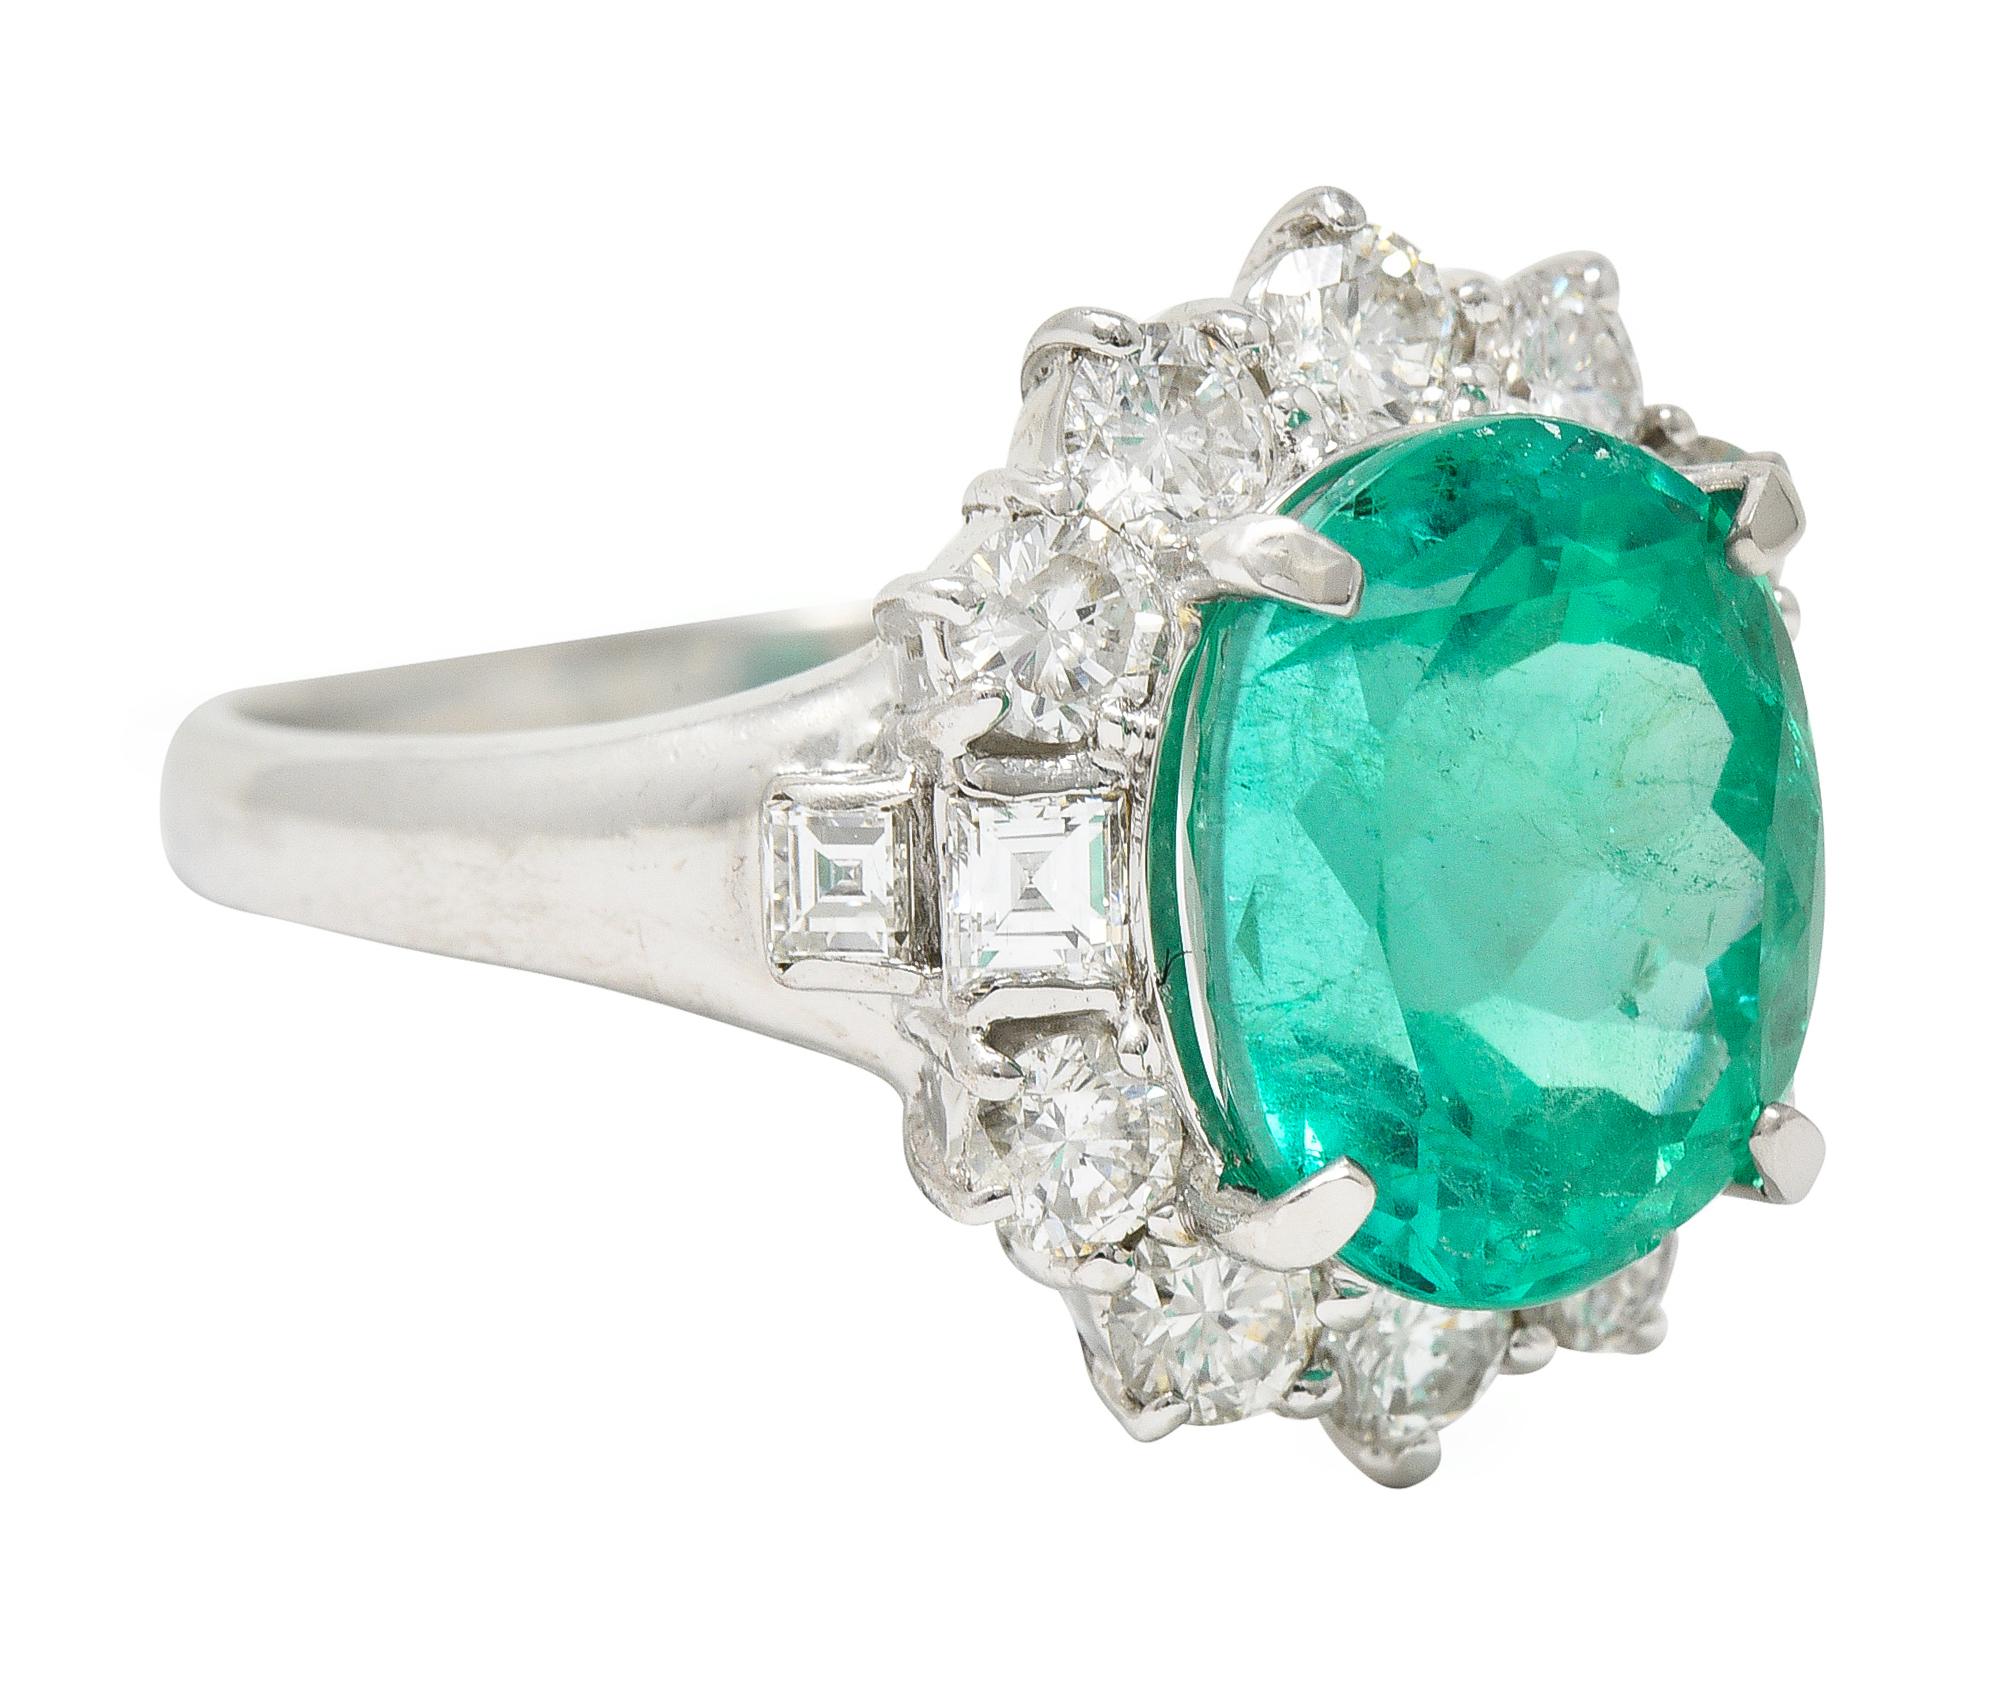 Centering an oval cut emerald weighing 5.34 carats - transparent vibrant light green in color
Natural Colombian in origin with moderate F2 clarity enhancement
With a halo surround of round brilliant and square step cut diamonds
Weighing 1.43 carats